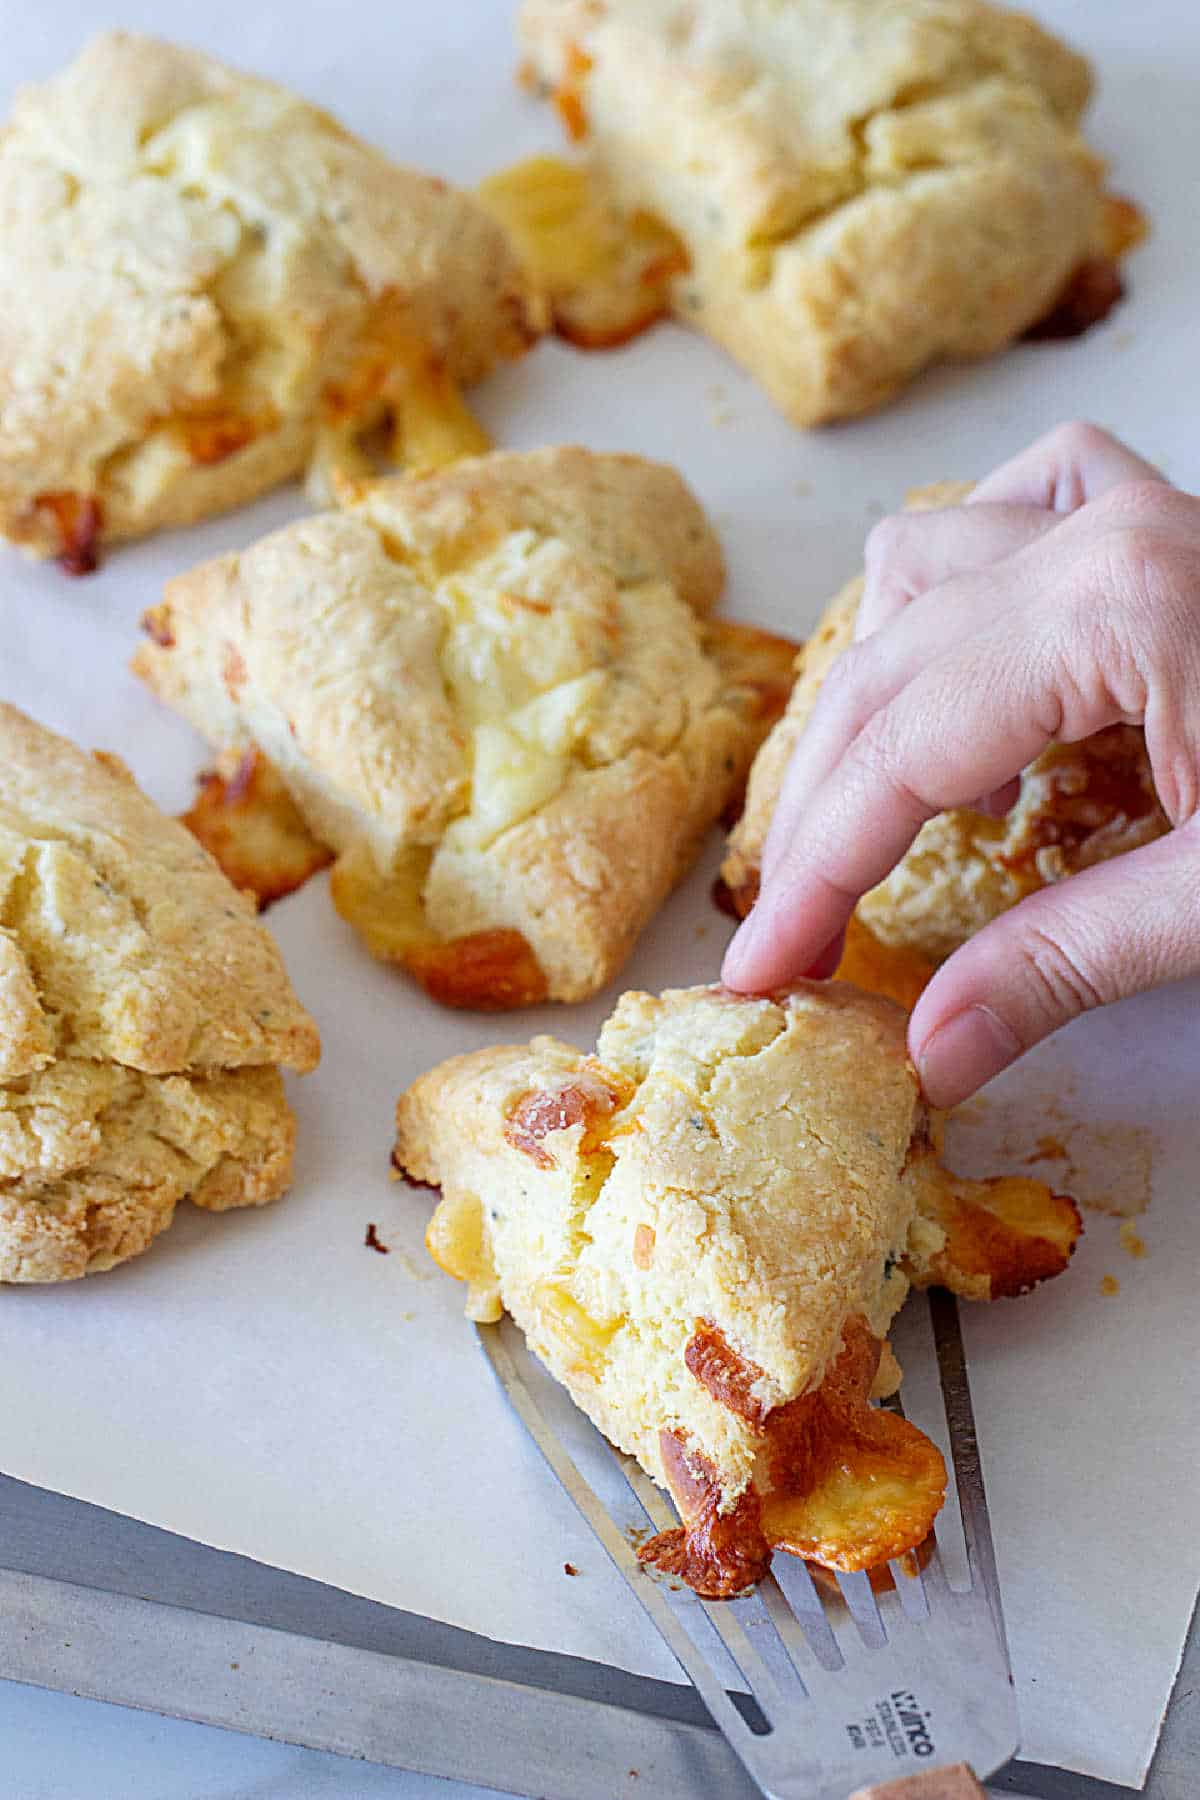 Lifting cheese scone from baking sheet containing several